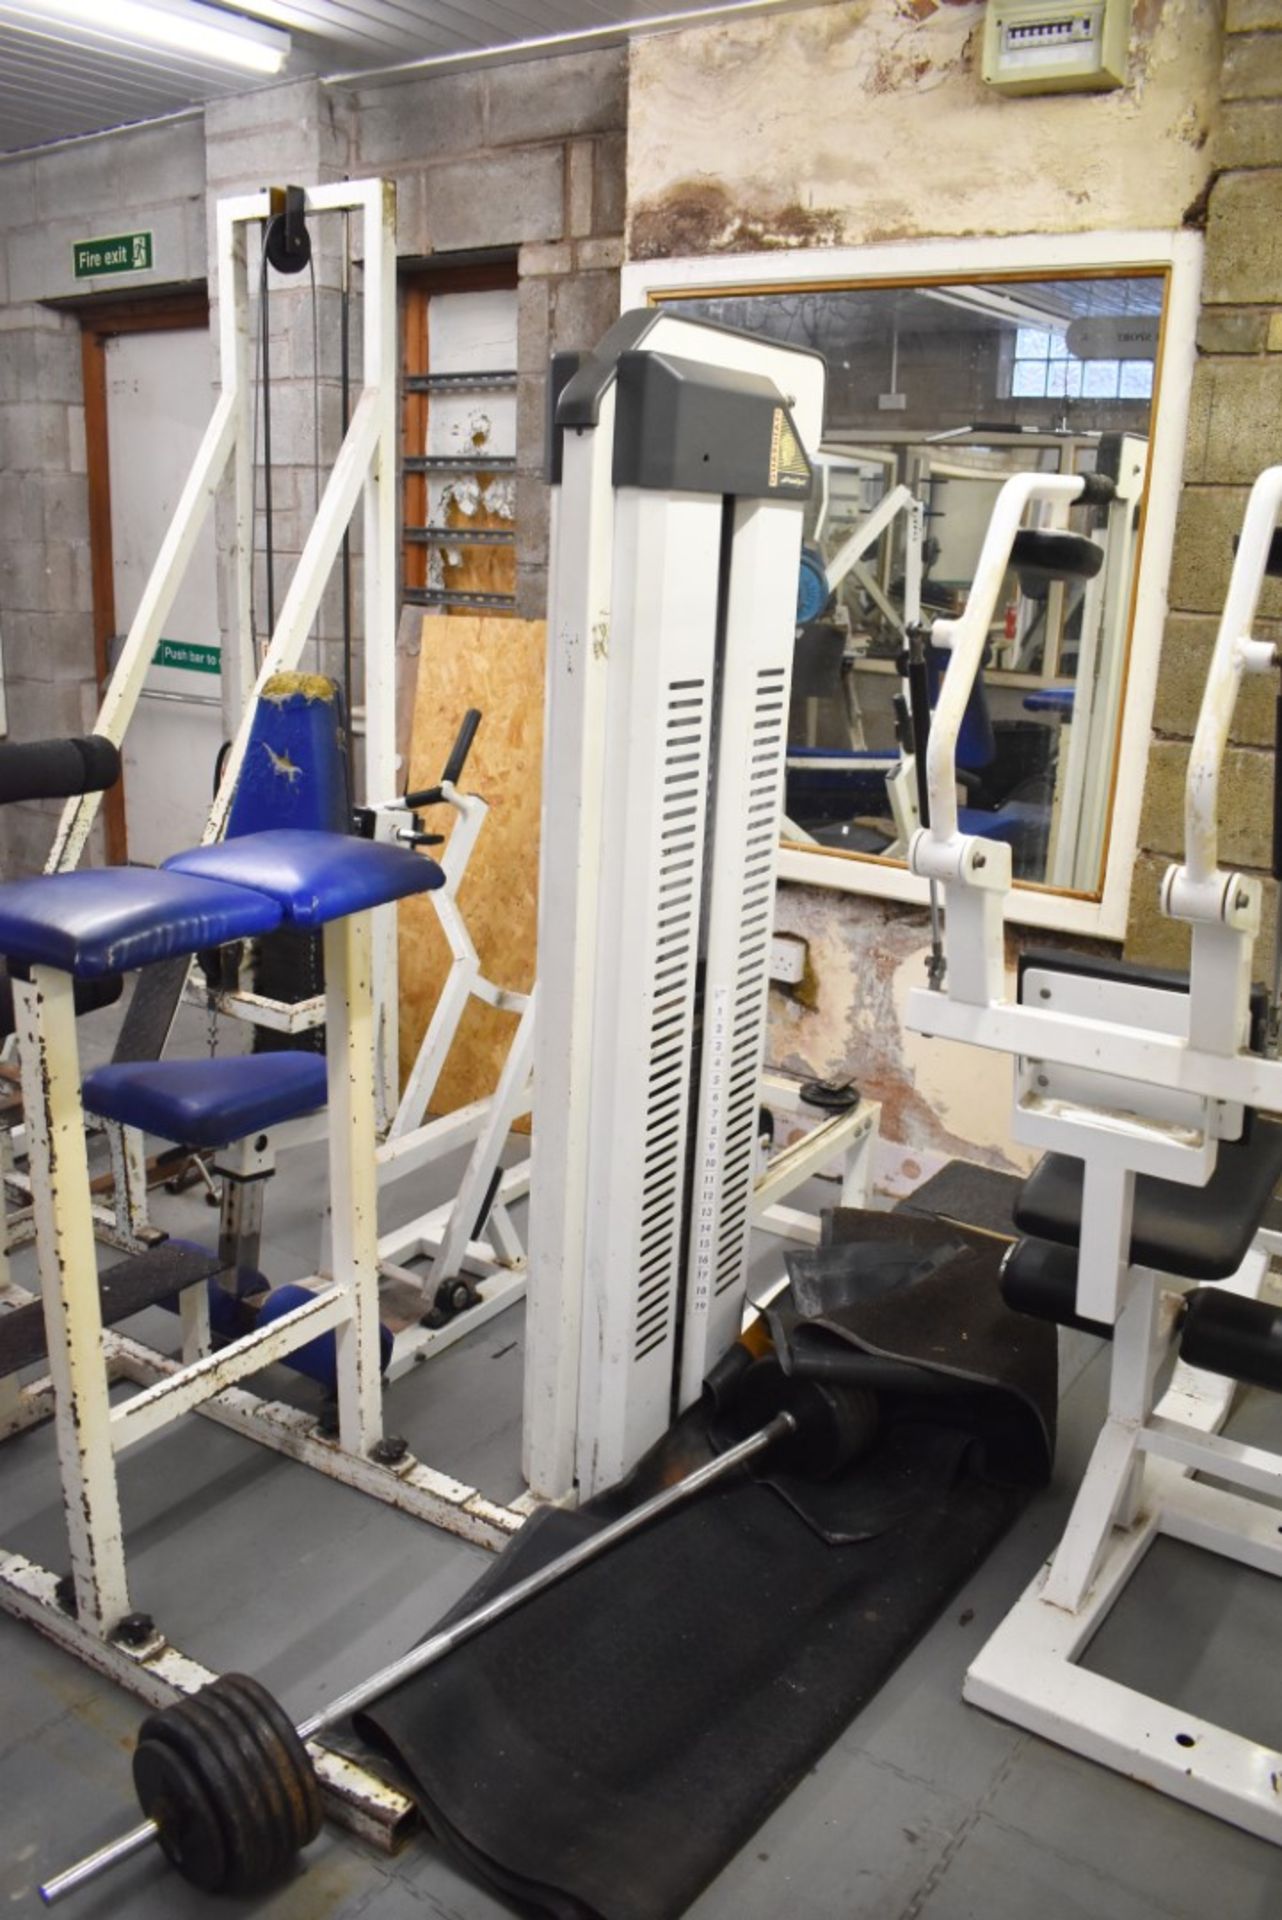 Contents of Bodybuilding and Strongman Gym - Includes Approx 30 Pieces of Gym Equipment, Floor Mats, - Image 51 of 95